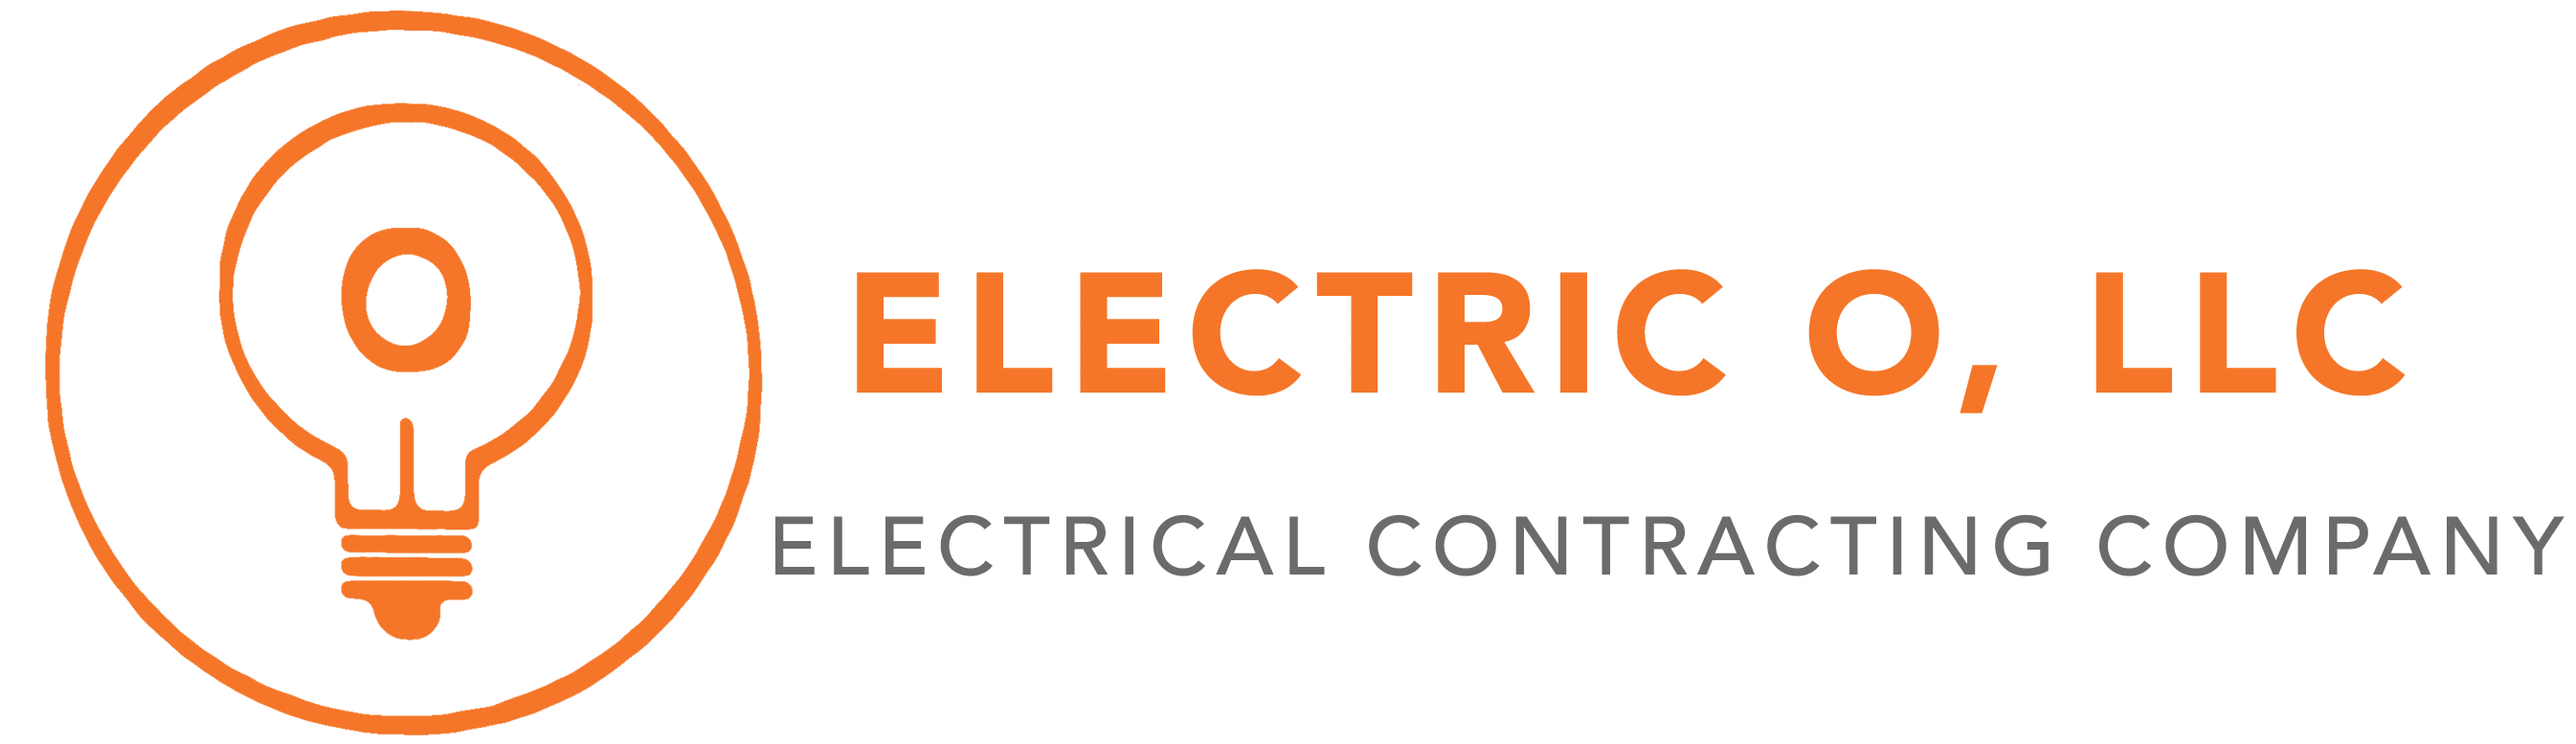 Commercial Electric Logo - Commercial Electrical Services. Weirton, WV Electrician